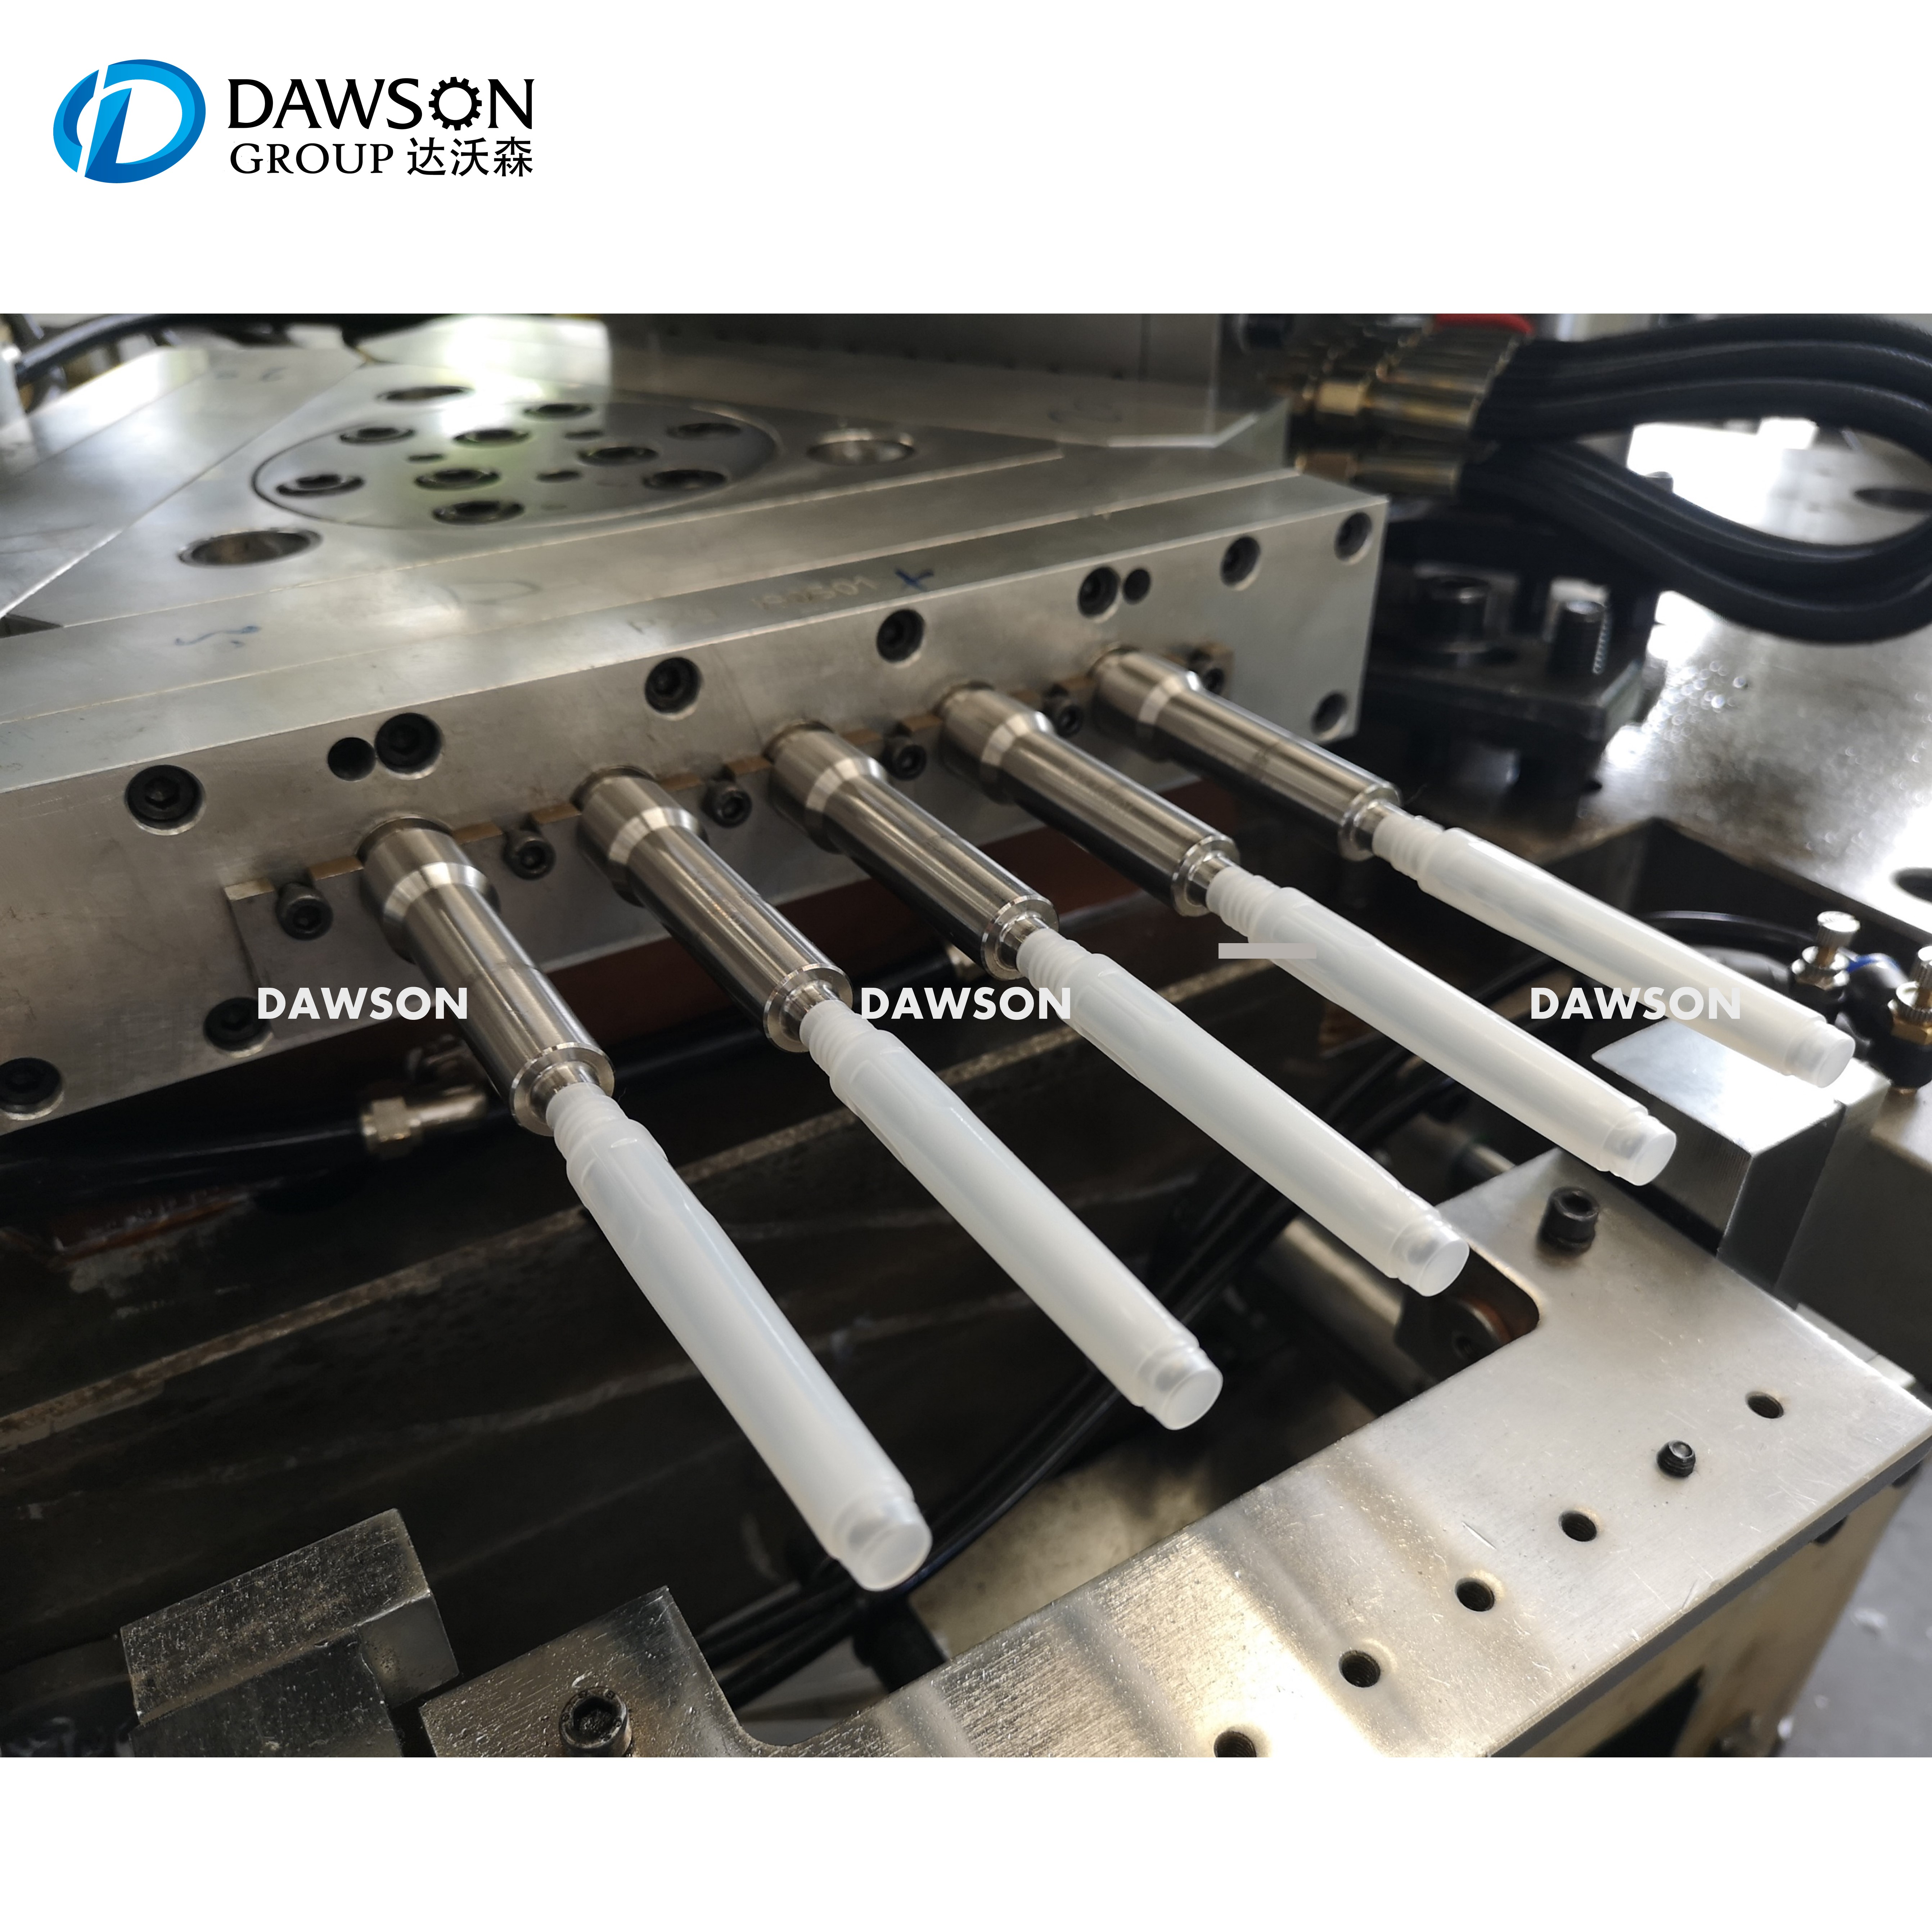 IBM injection blow molding machine | Efficient production and precision manufacturing | Dawson Company